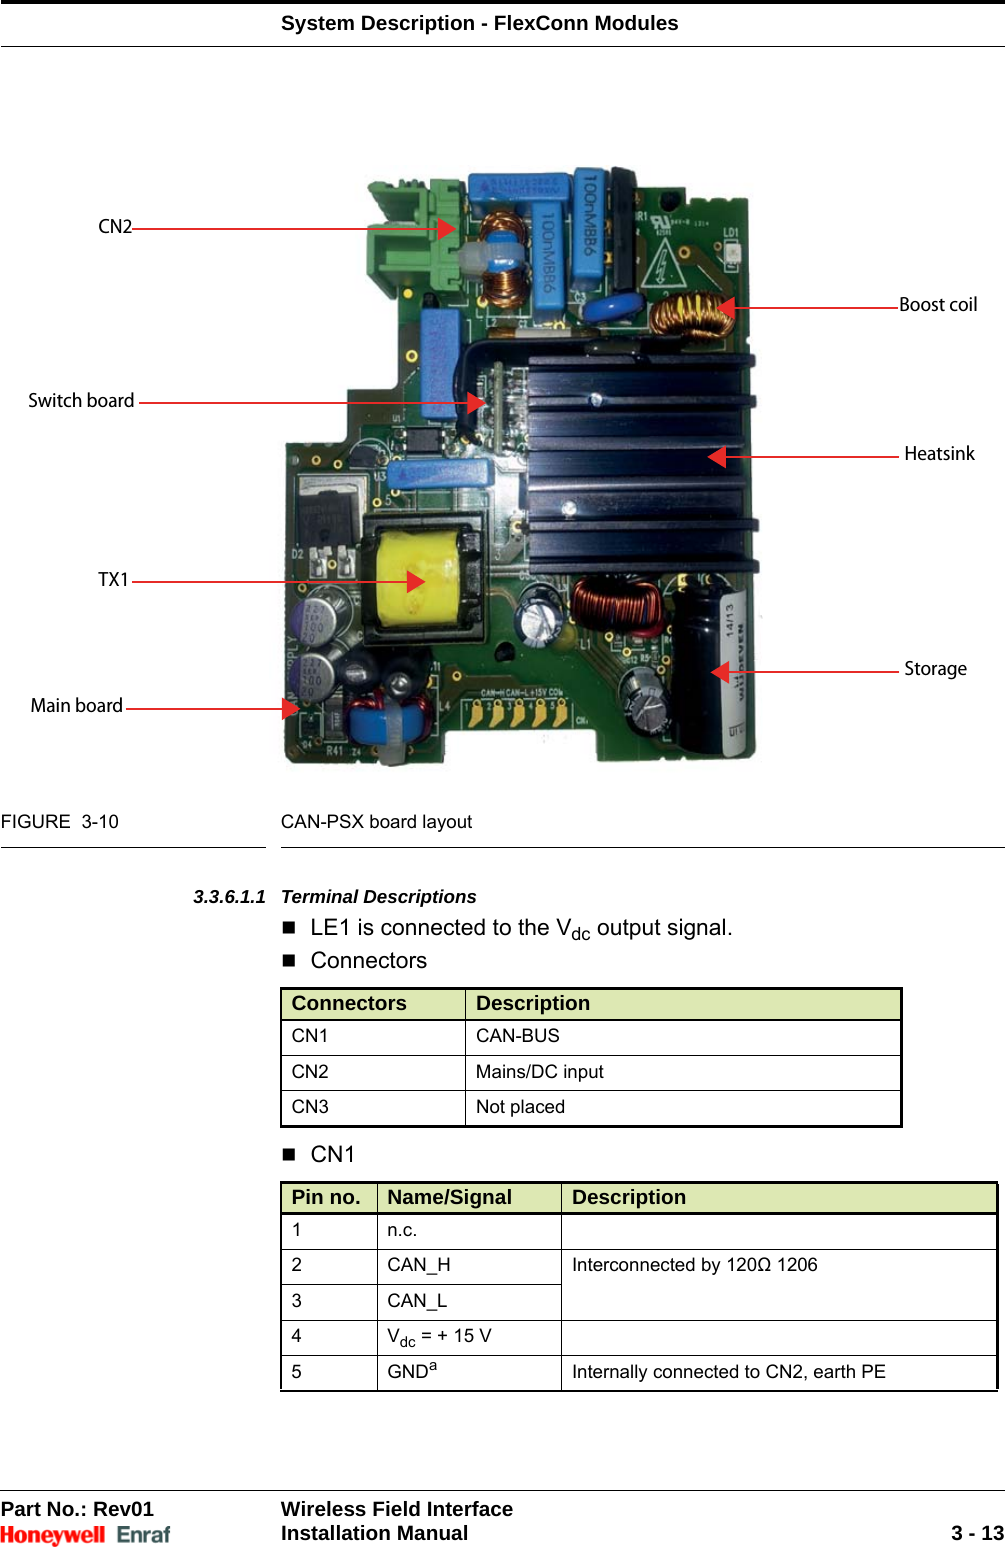 System Description - FlexConn ModulesPart No.: Rev01  Wireless Field InterfaceInstallation Manual 3 - 13FIGURE  3-10 CAN-PSX board layout3.3.6.1.1 Terminal DescriptionsLE1 is connected to the Vdc output signal.Connectors CN1 Connectors DescriptionCN1 CAN-BUSCN2 Mains/DC inputCN3 Not placedPin no. Name/Signal Description1n.c.2 CAN_H Interconnected by 120Ω 1206 3CAN_L4Vdc = + 15 V5GNDaInternally connected to CN2, earth PECN2Switch boardMain boardStorageHeatsinkBoost coilTX1